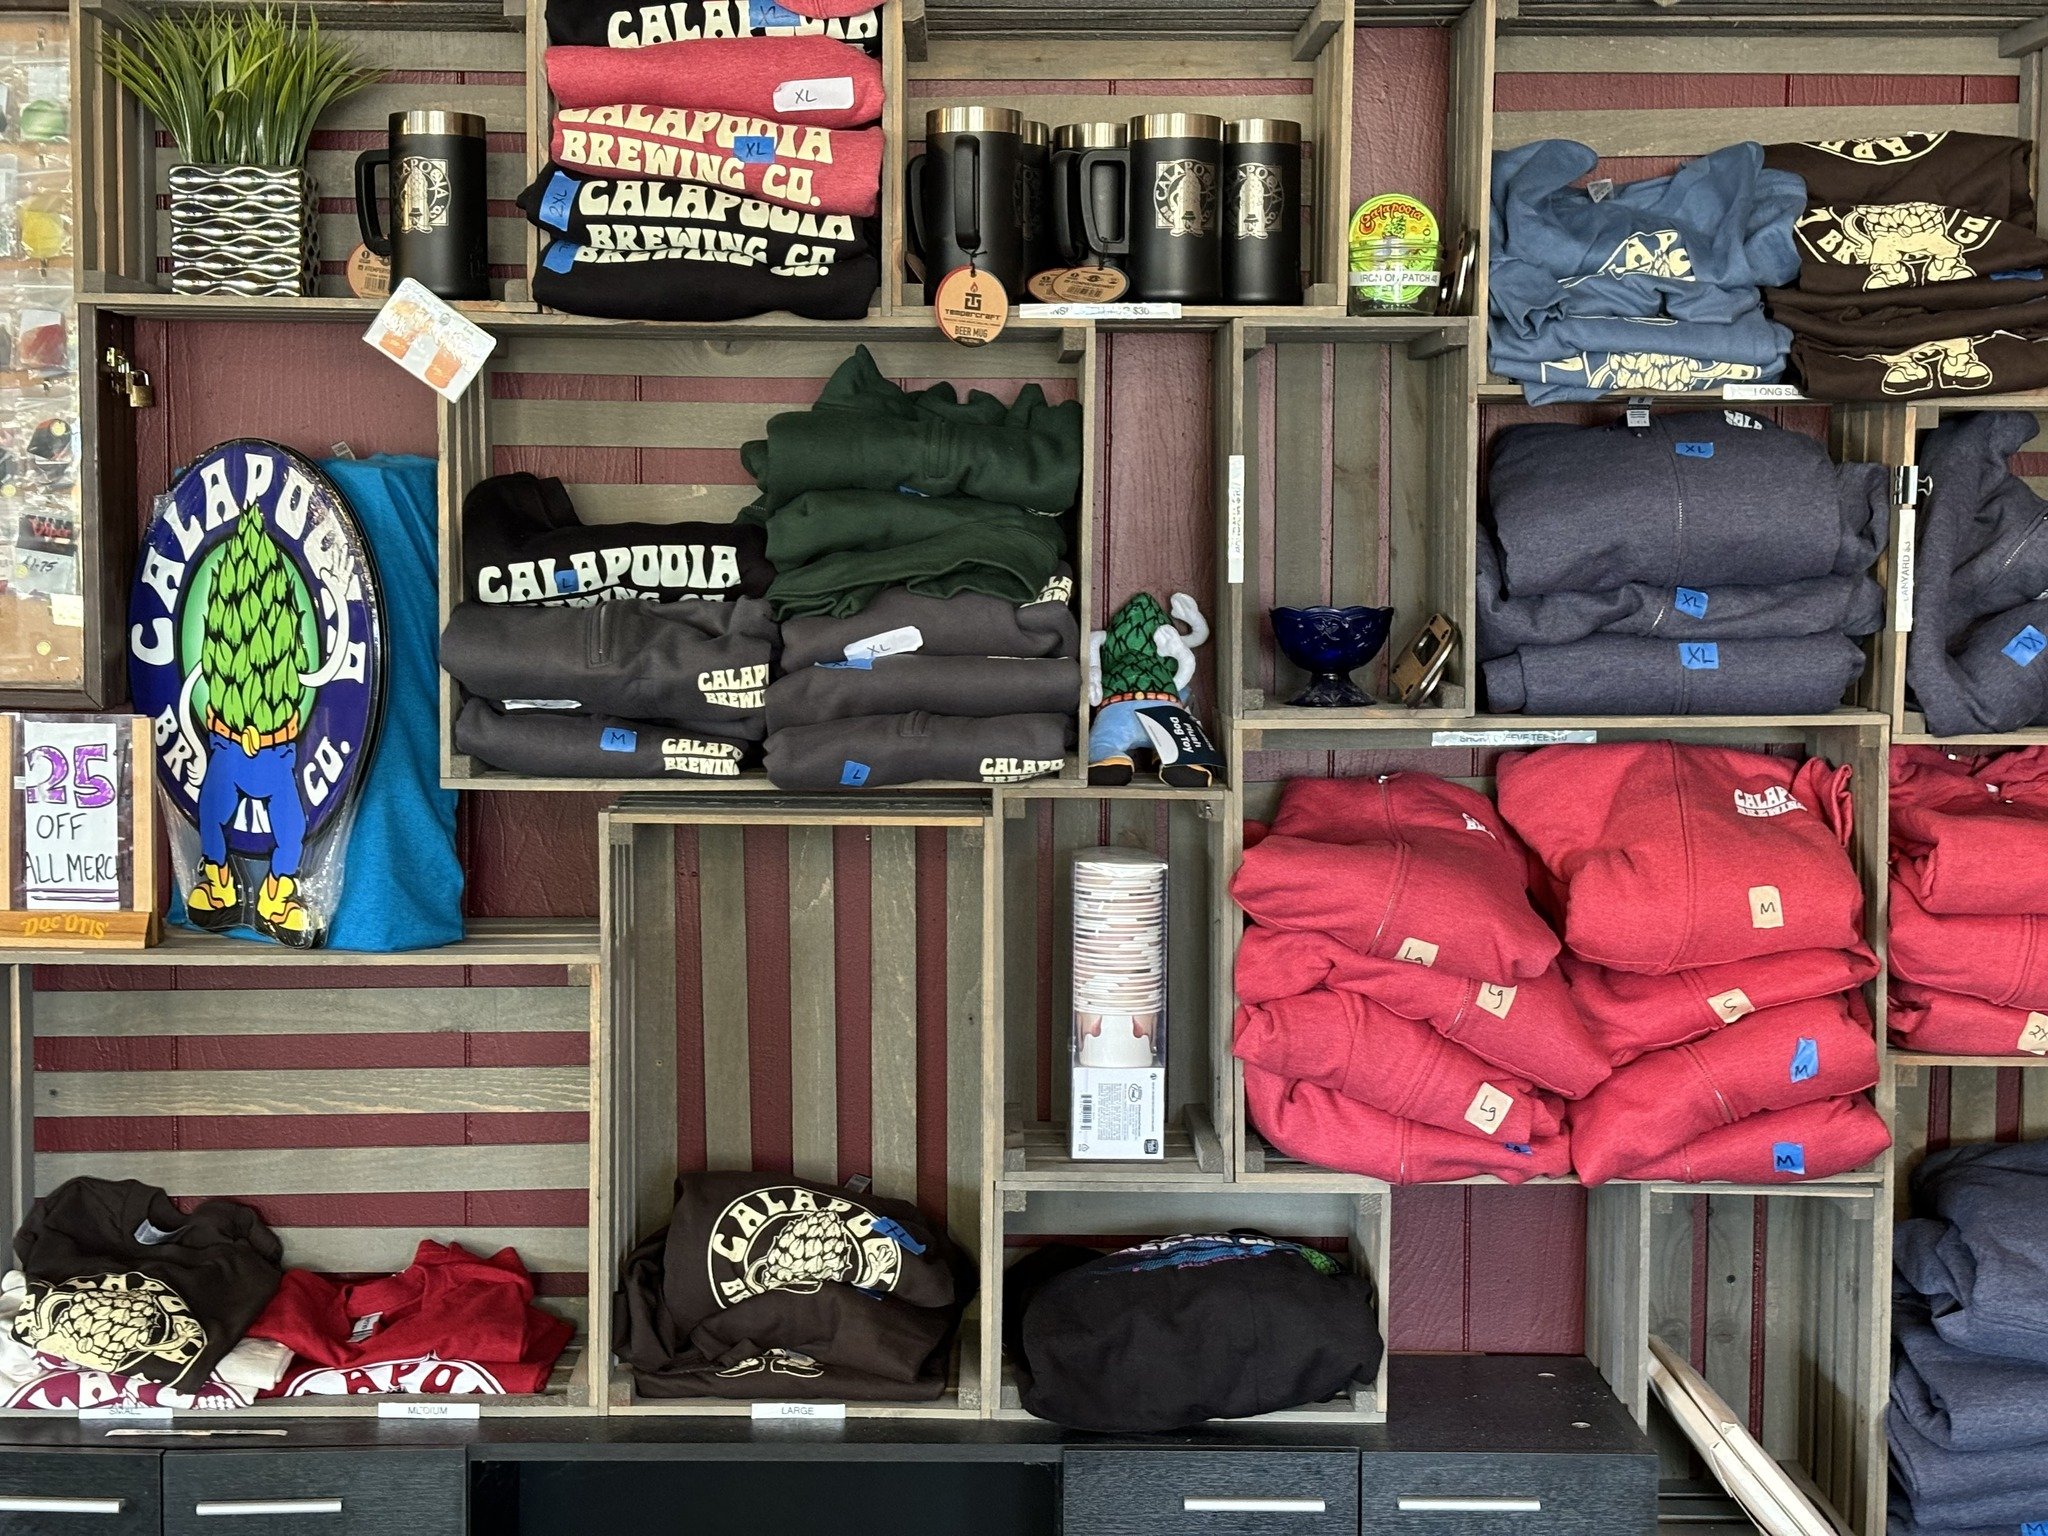 Happy Earth Day! All in stock merch is 25% off. Come in and stock up on your favorites.